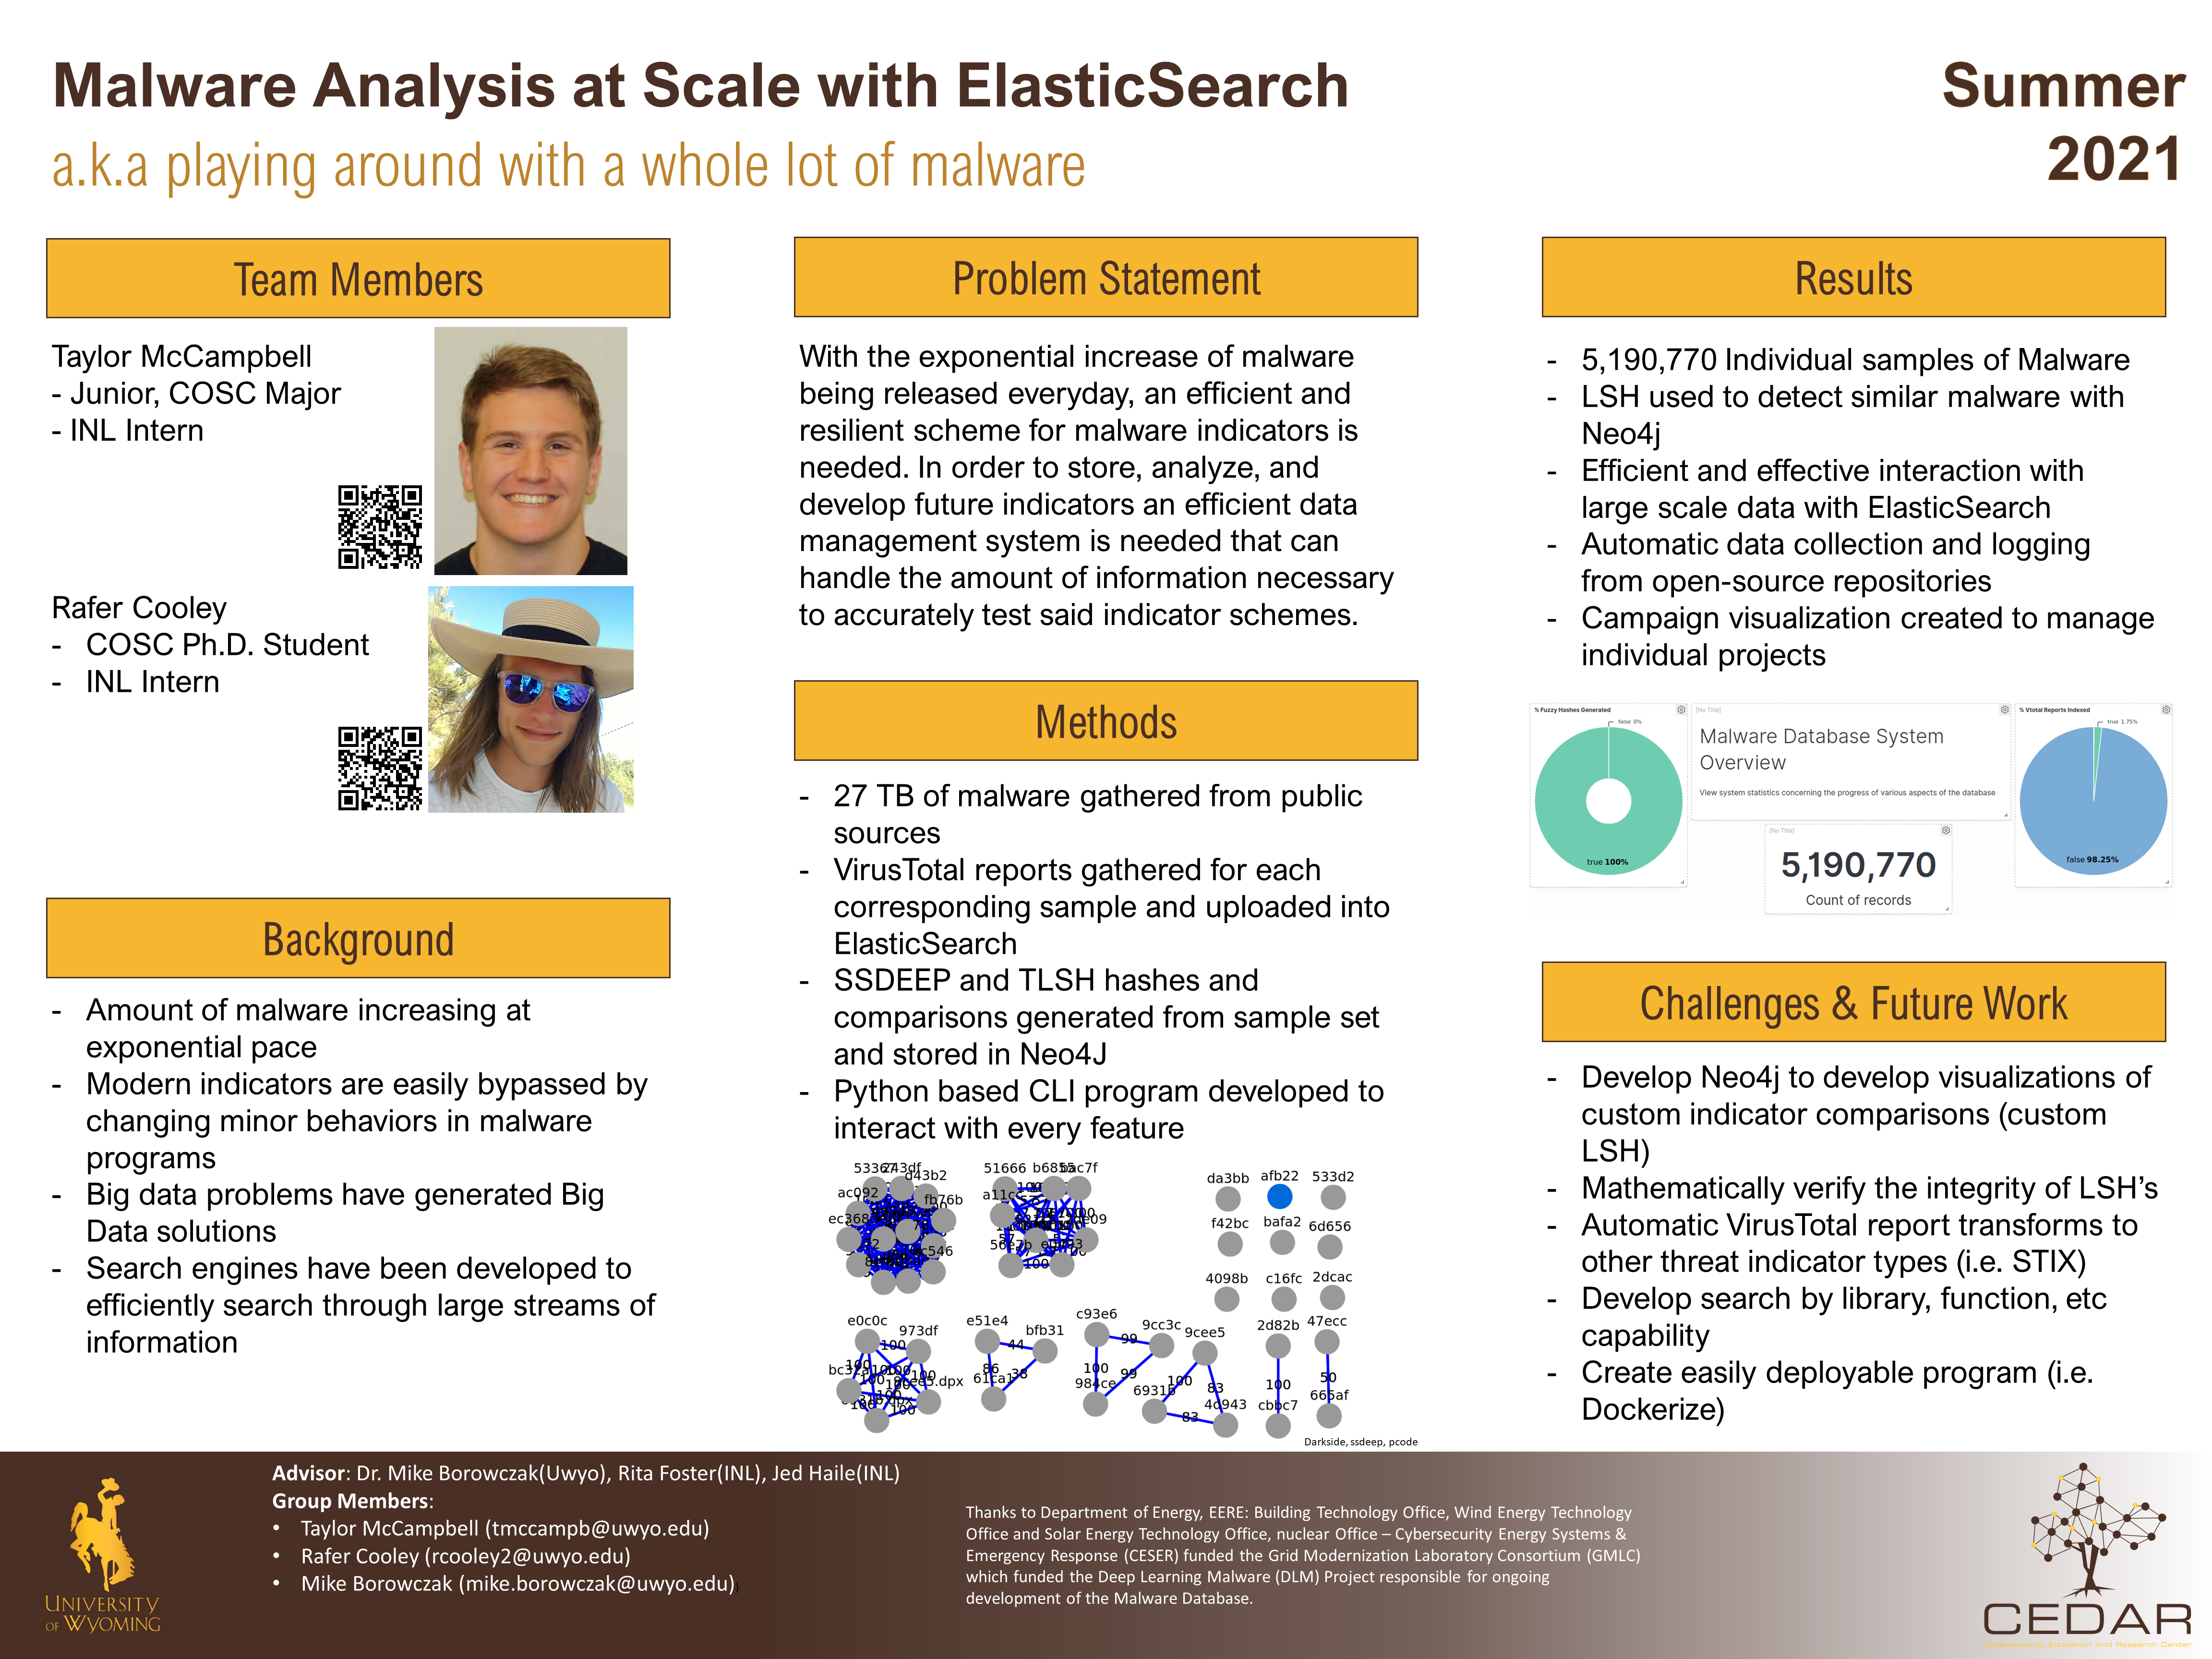  Poster for Malware Analysis at Scale with ElasticSearch